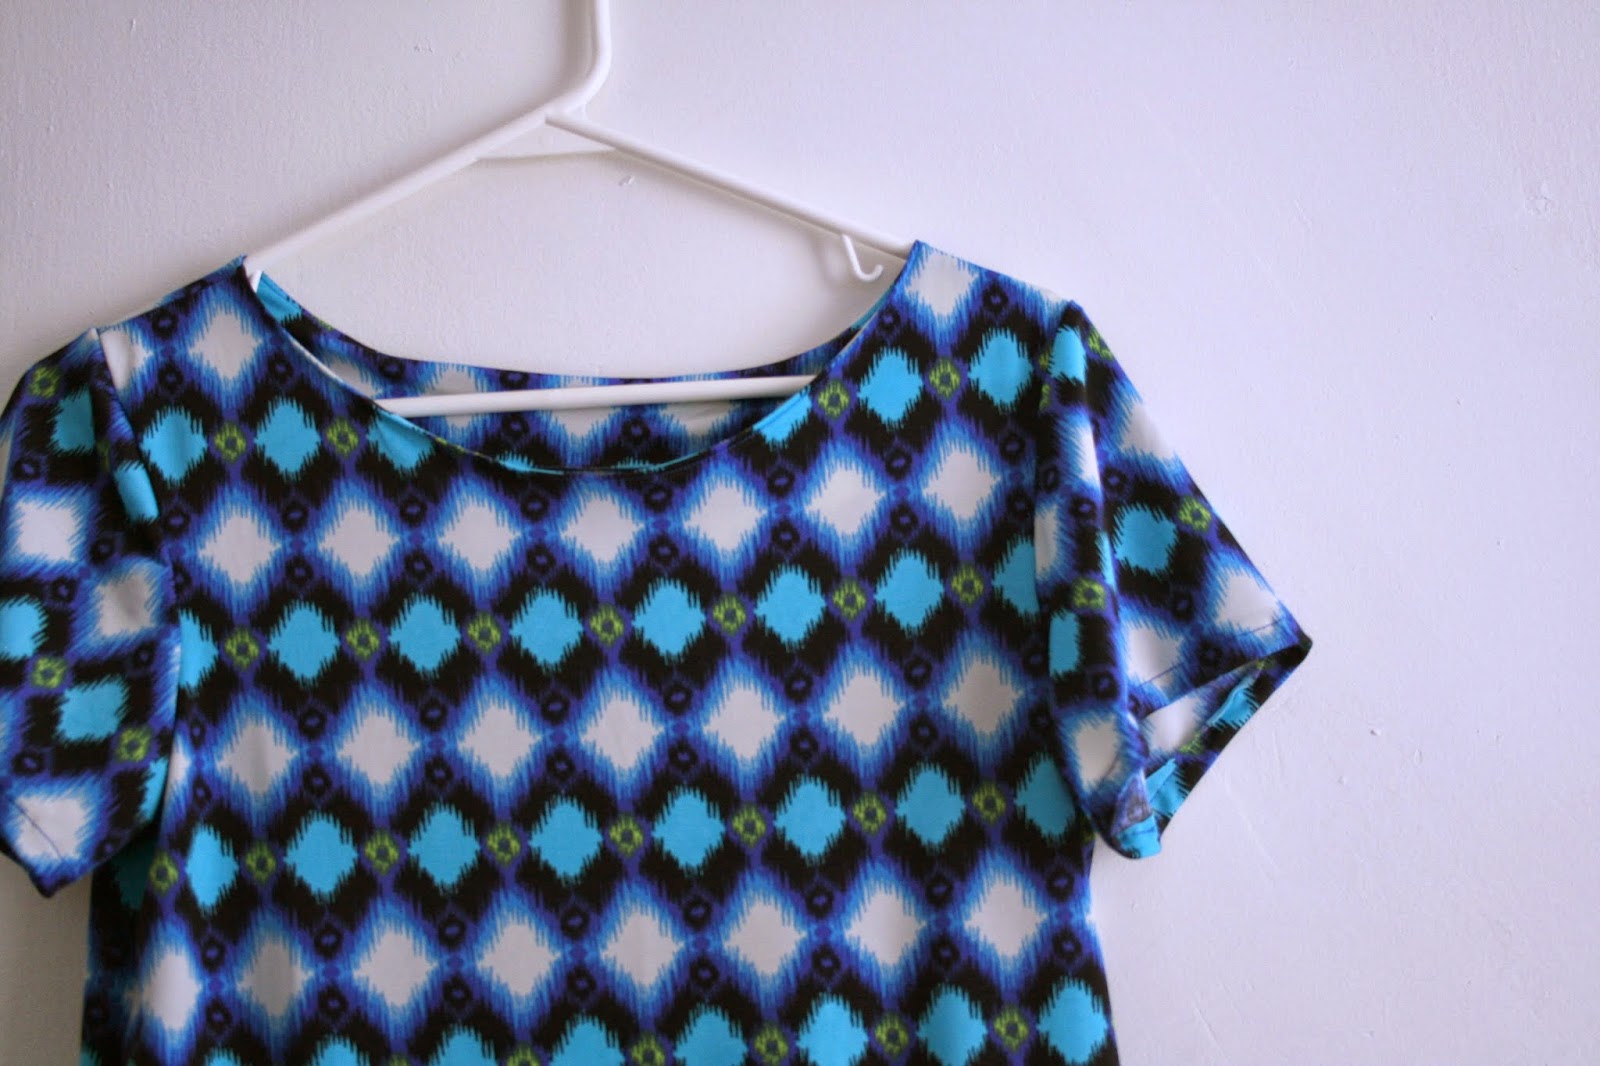 Tangible Pursuits: Sewing for Myself: Boatneck Top